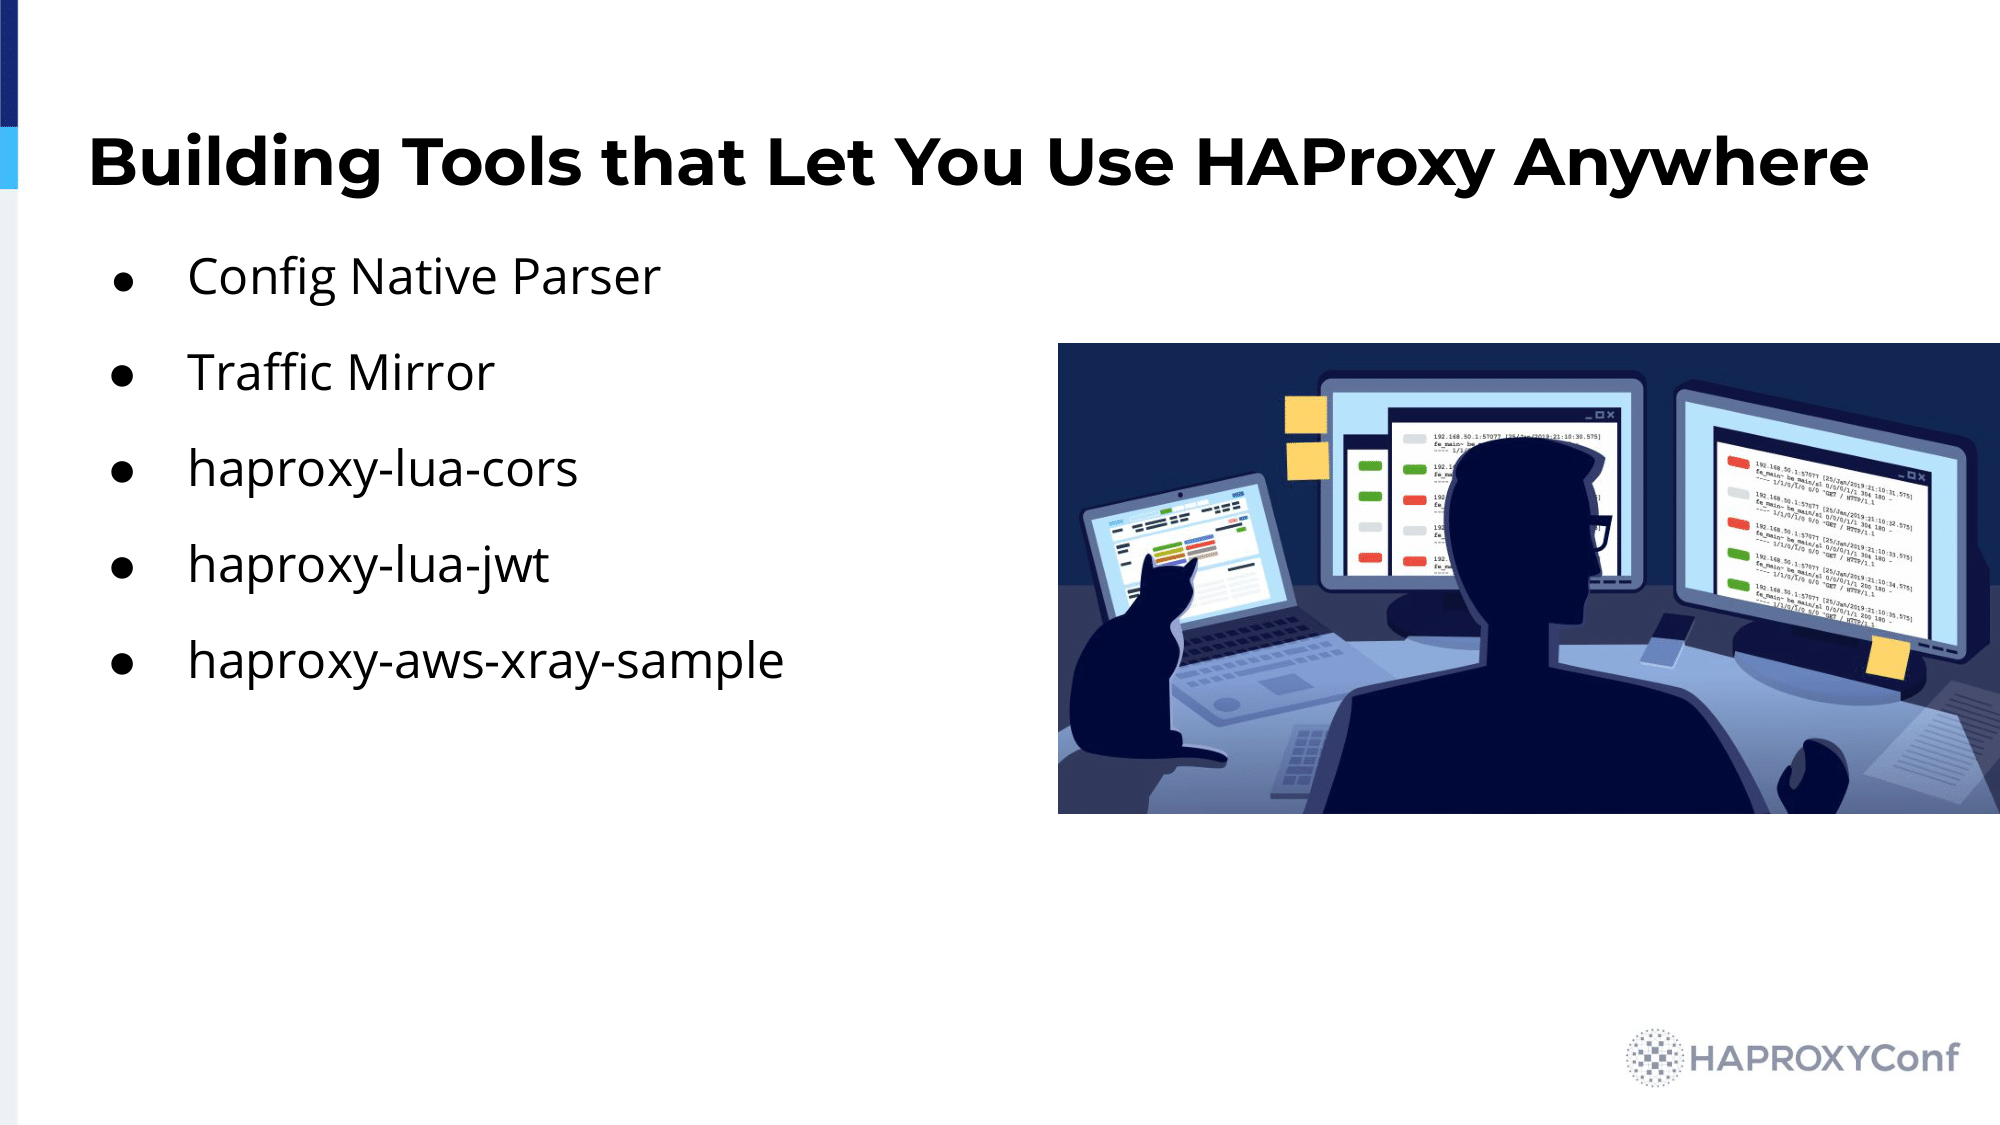 6.-building-tools-that-let-you-use-haproxy-anywhere-1675706265